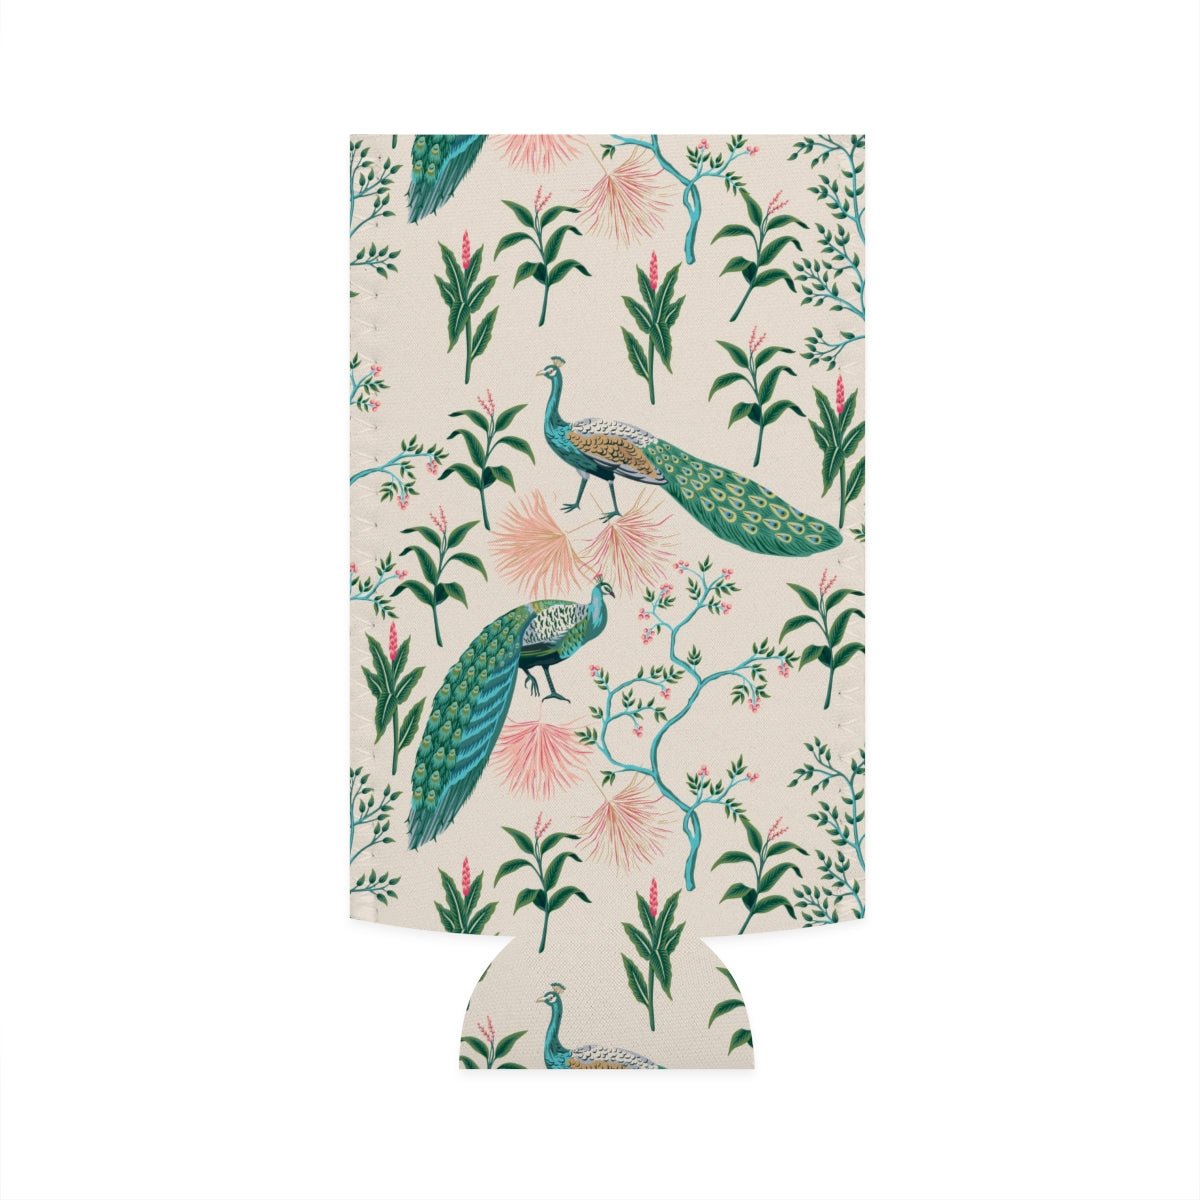 Chinoiserie Peacocks Slim Can Cooler - Puffin Lime